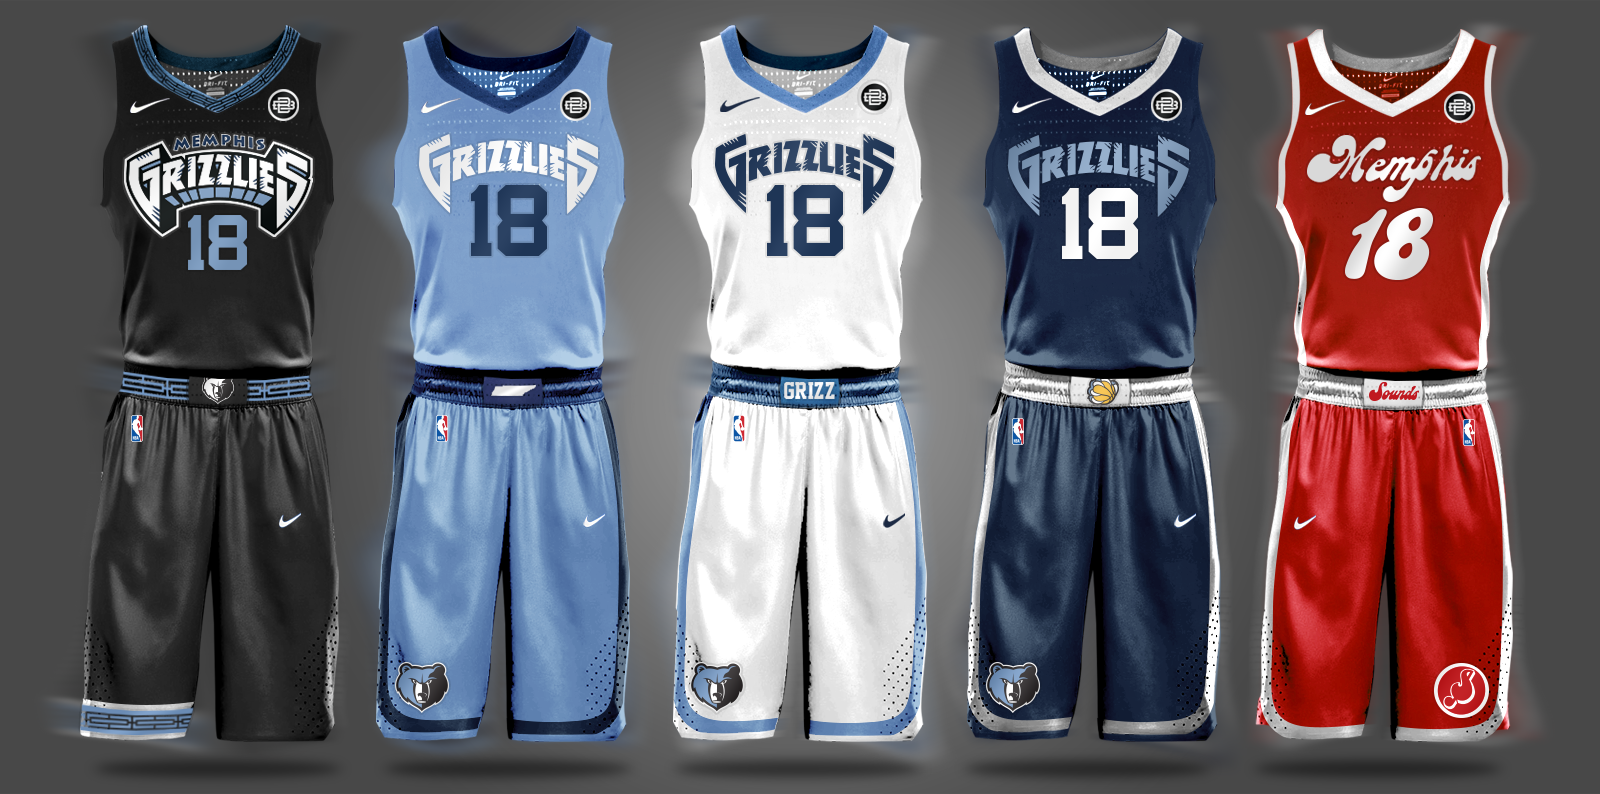 Look: NBA uniform concepts for some of the league's best teams